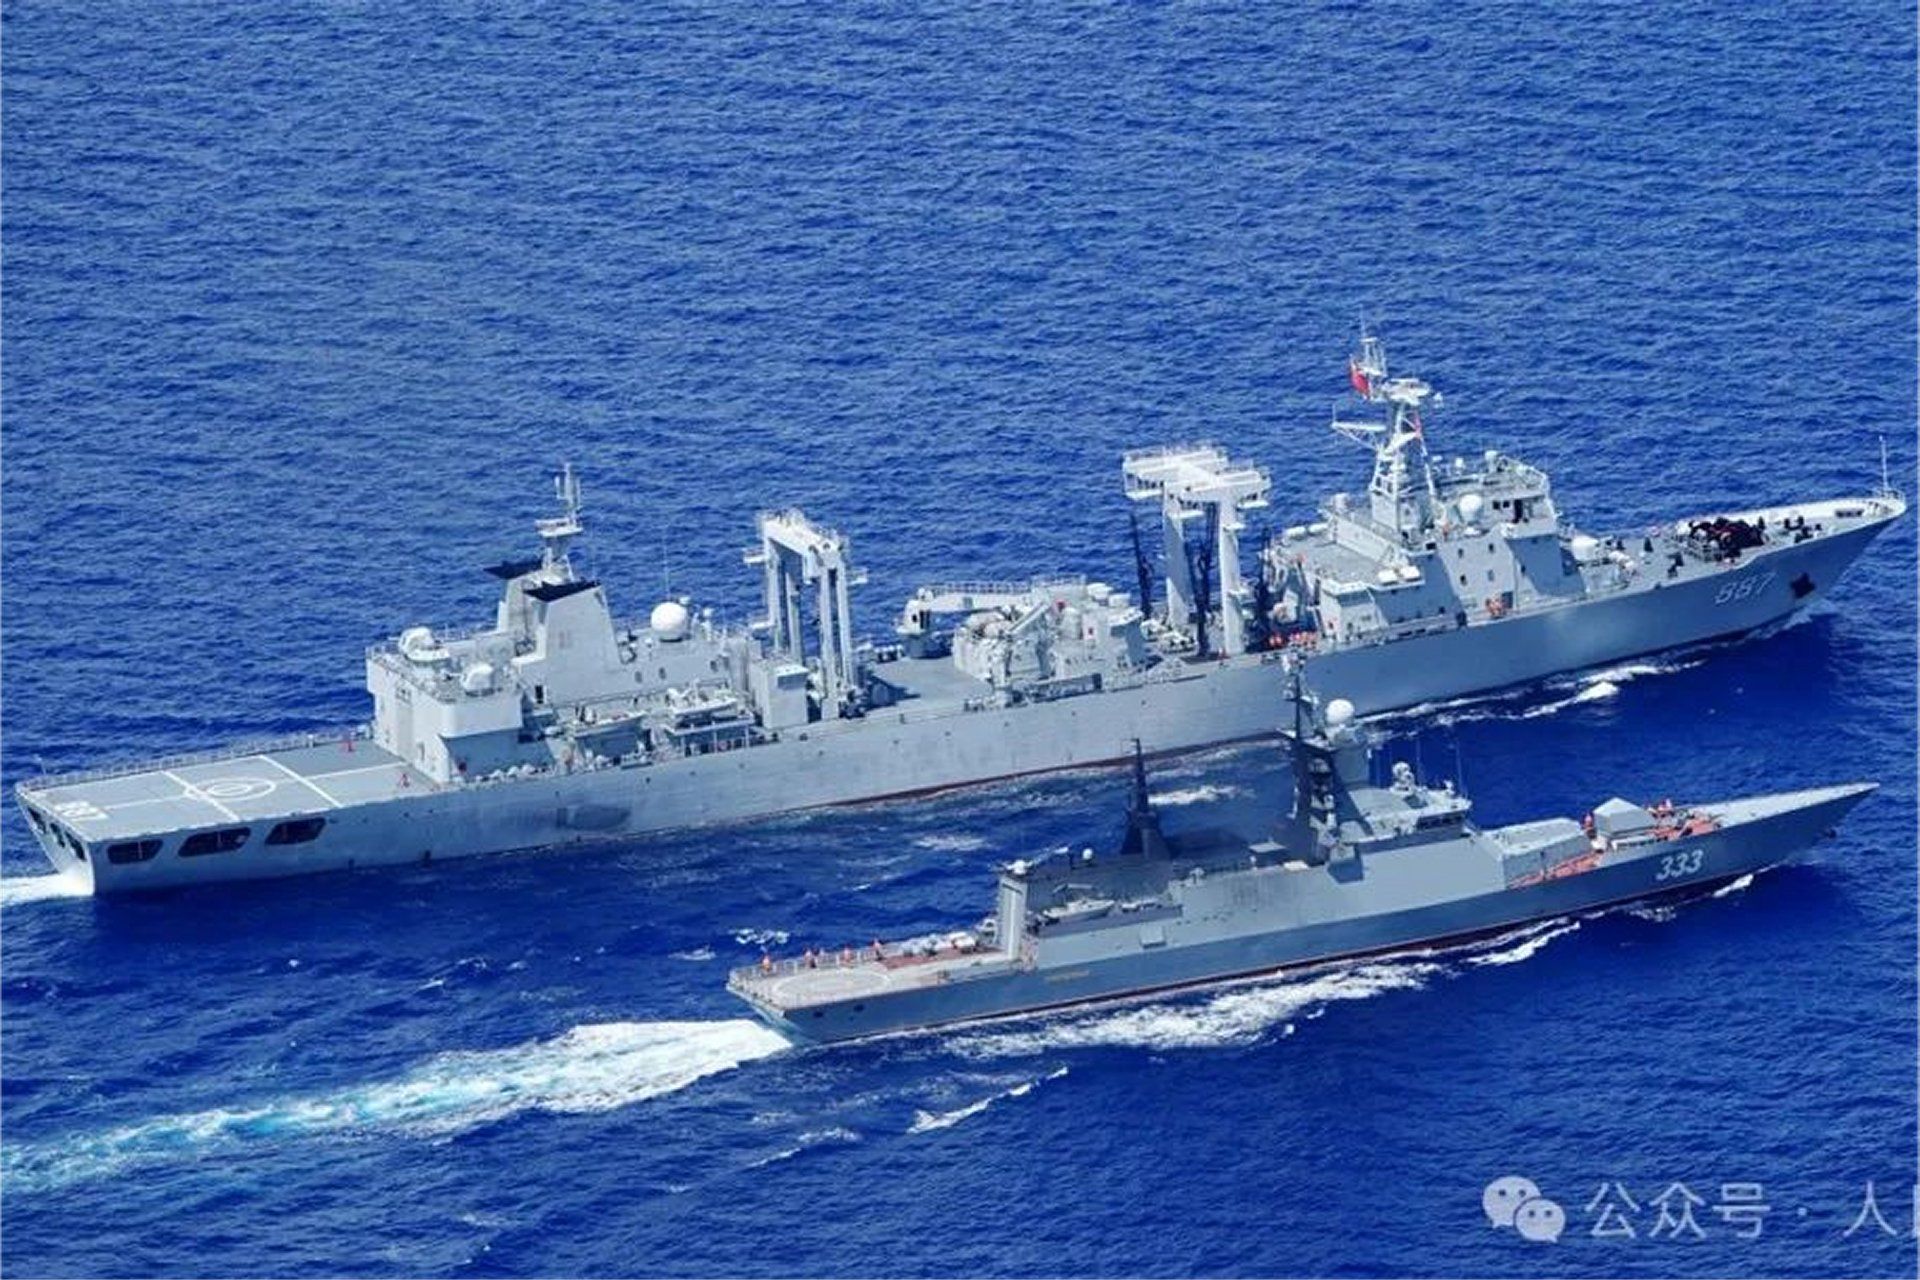 China_and_Russia_conduct_joint_military_drills_in_South_China_Sea_amid_rising_tensions-7382b1d0.jpeg